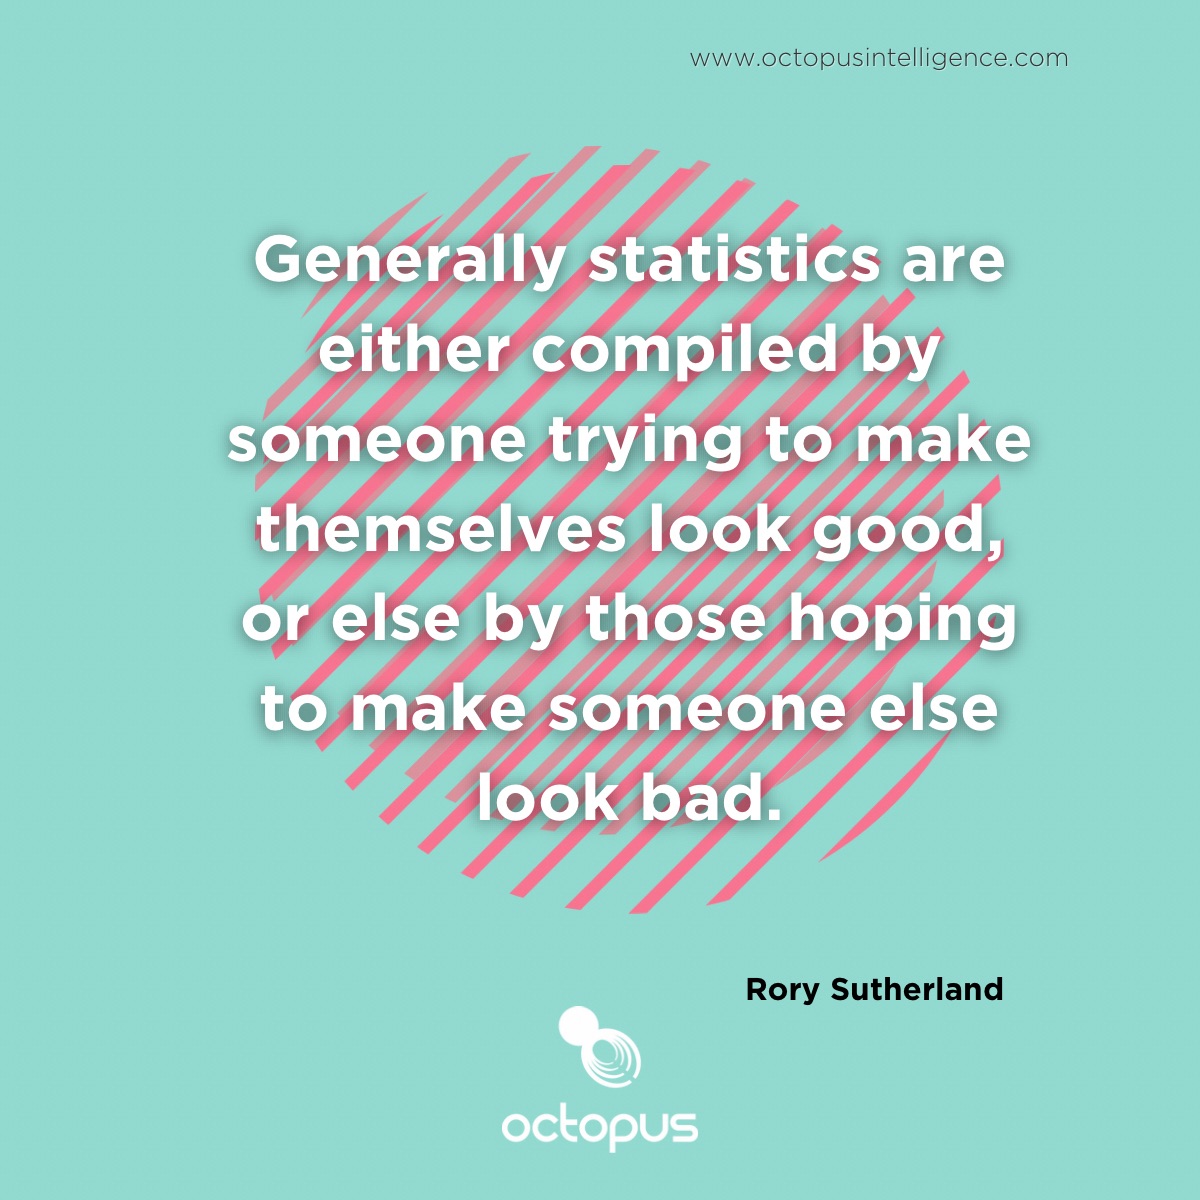 Generally statistics are either compiled by someone trying to make themselves look good, or else by those hoping to make someone else look bad.

We Find The Answers To Beat Your Competitors
#competitiveintelligence #marketintelligence #competitoranalysis

octopusintelligence.com